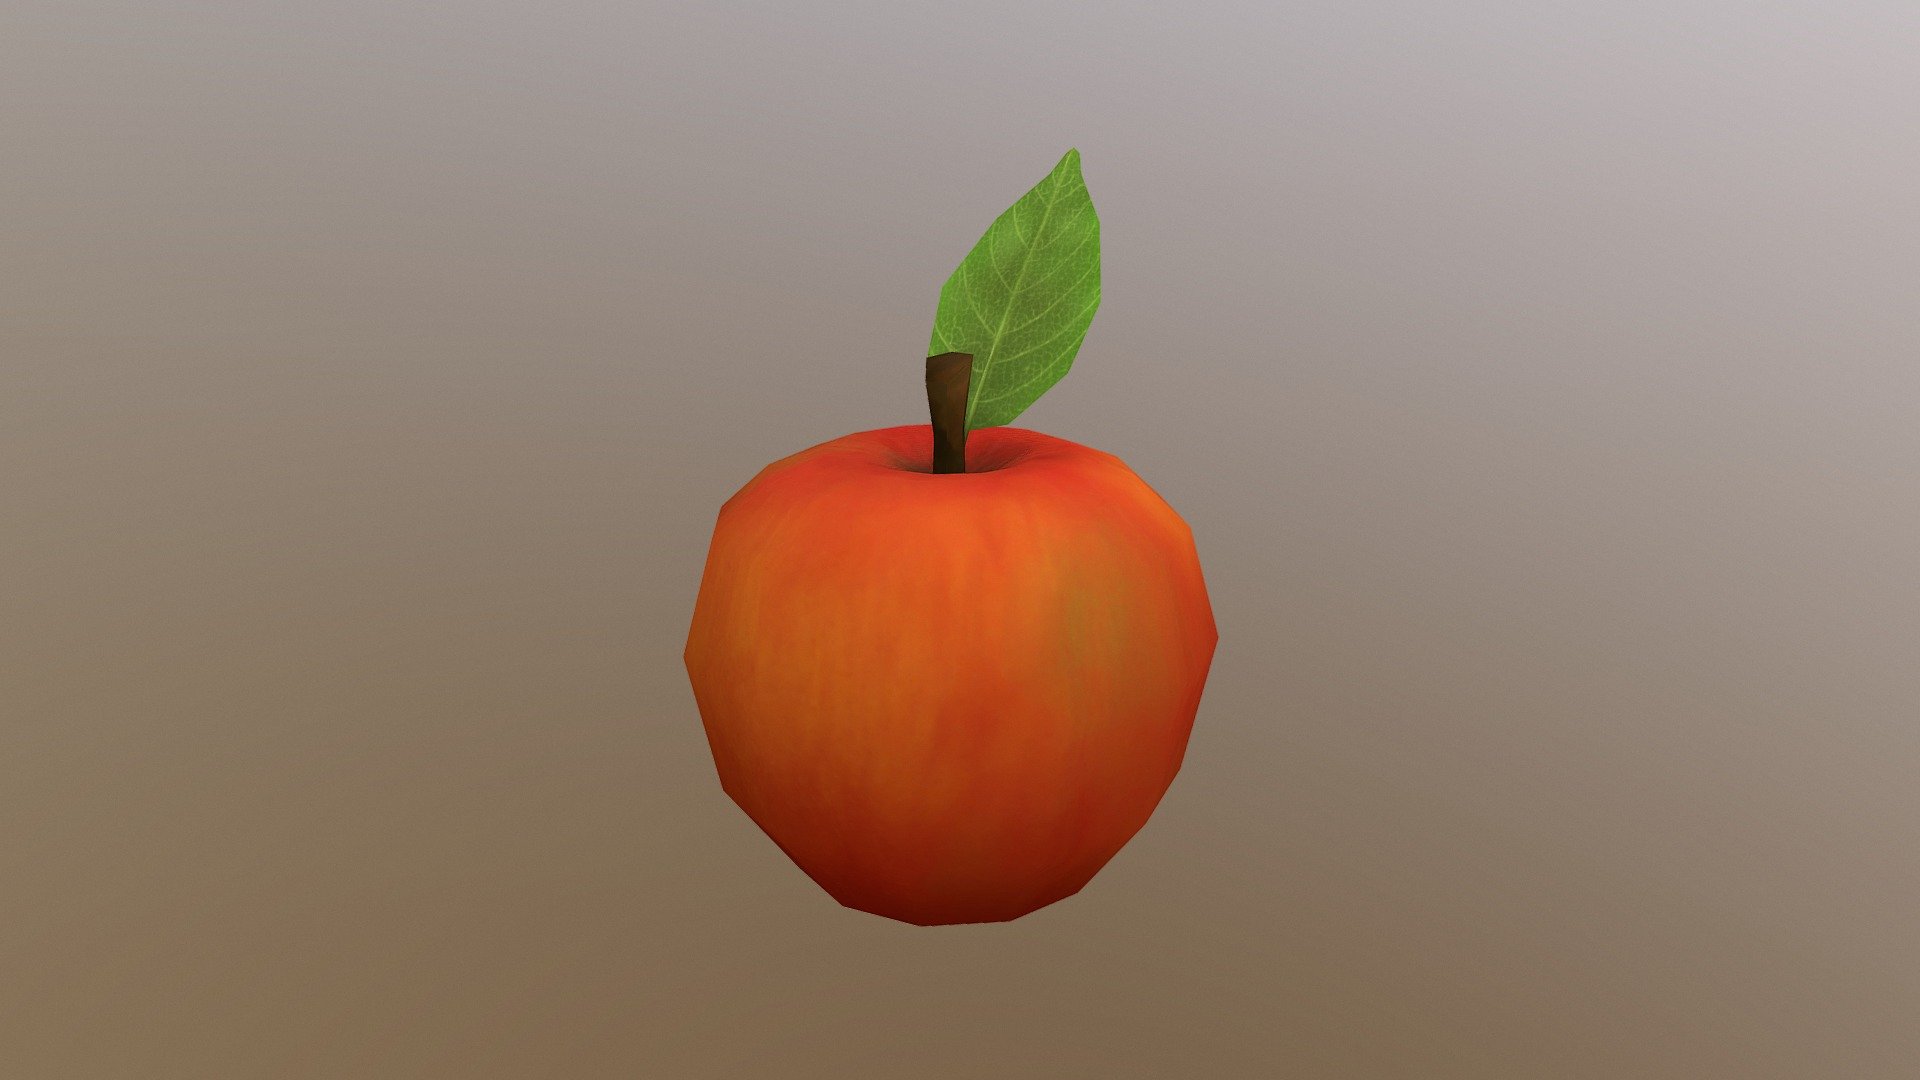 Just simple low-poly model of apple with hand-painted texture. Made in free time to practice a little. Modeled in Blender, textured in 3dCoat.
Feel free to use! :) - Red Low-Poly Apple - Download Free 3D model by SilverUnicorn 3d model